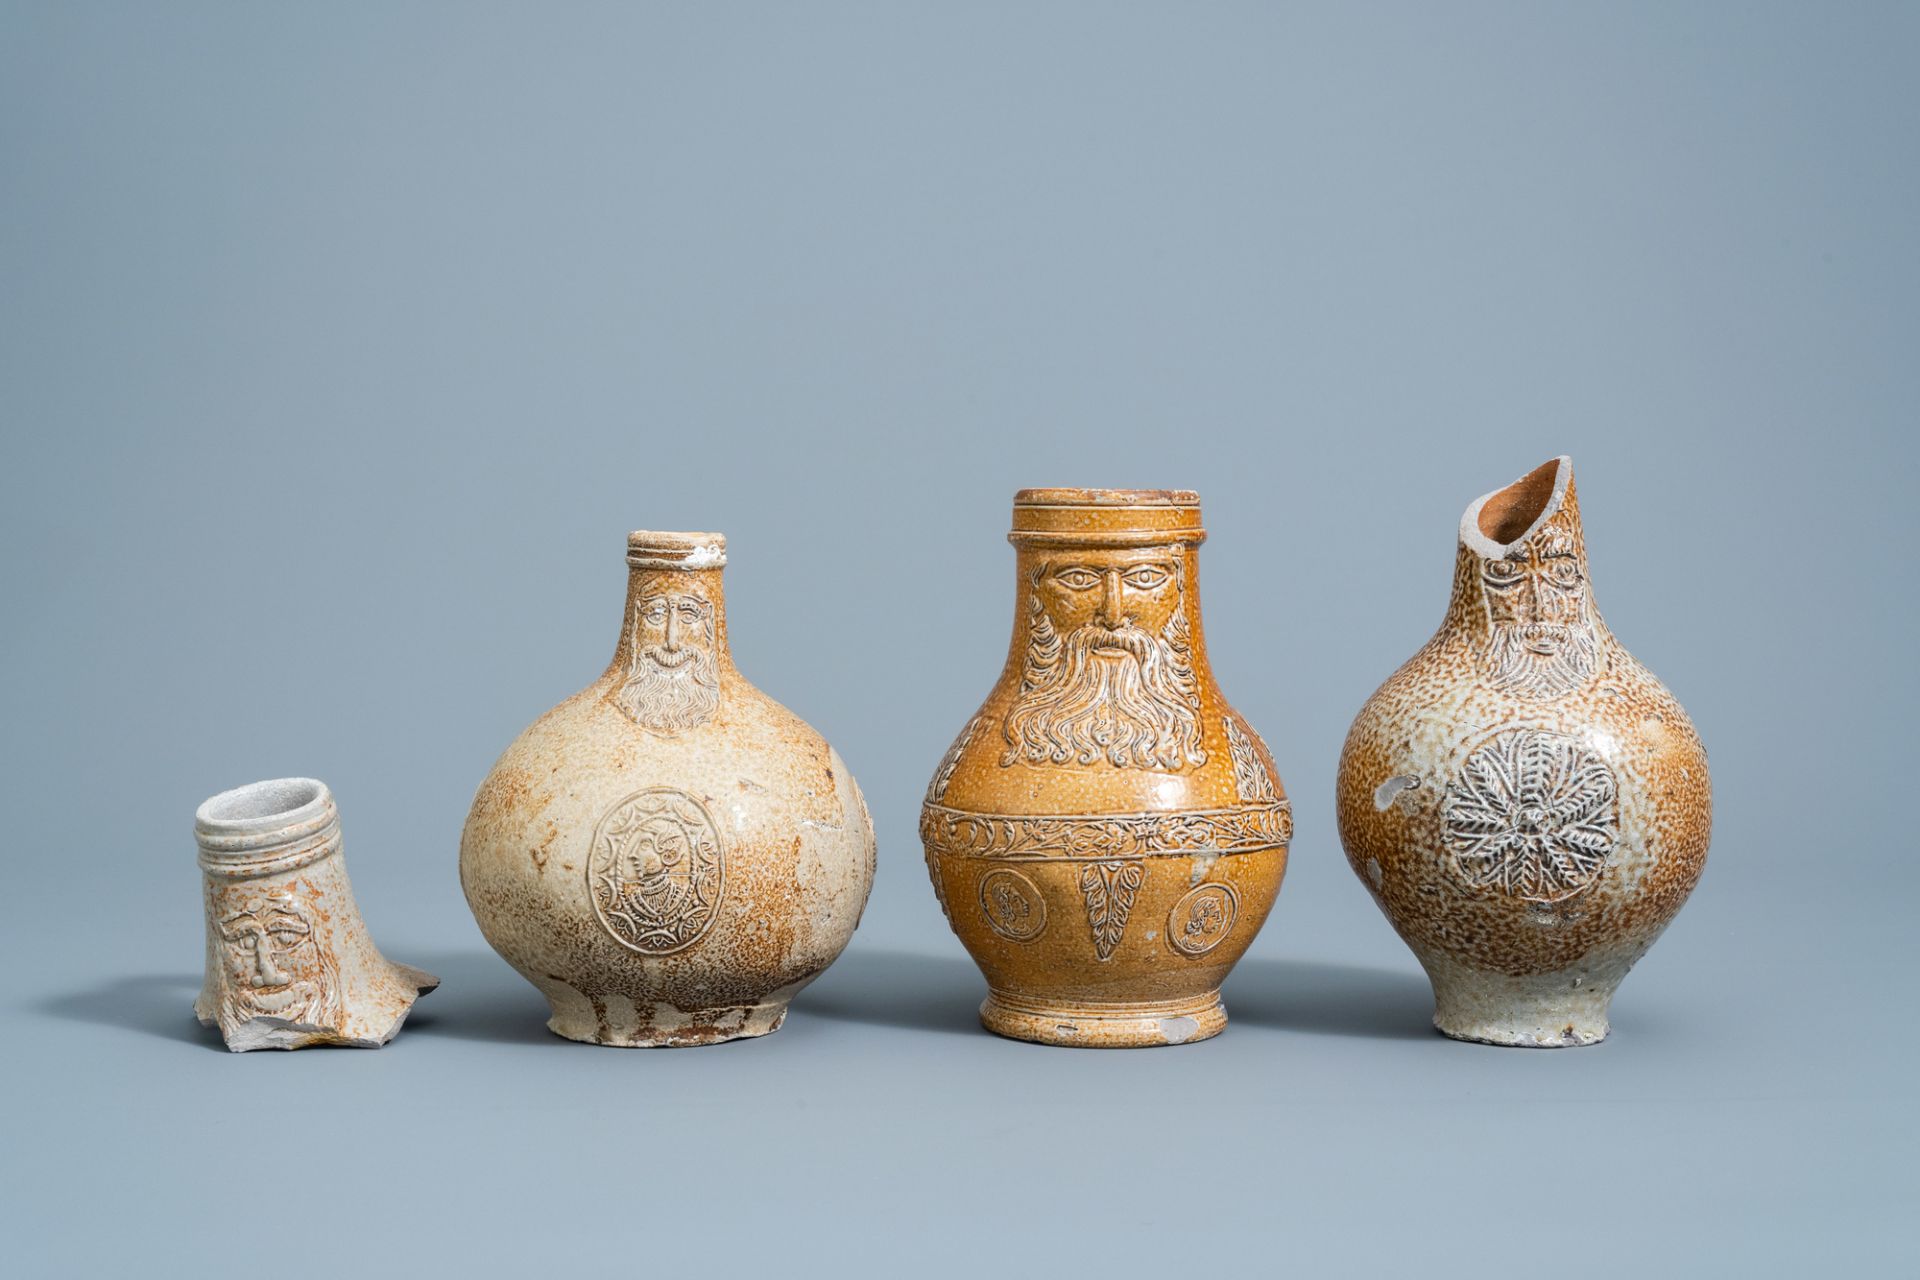 Three German stoneware bellarmine jugs and a neck fragment, 16th/17th C. - Image 2 of 8